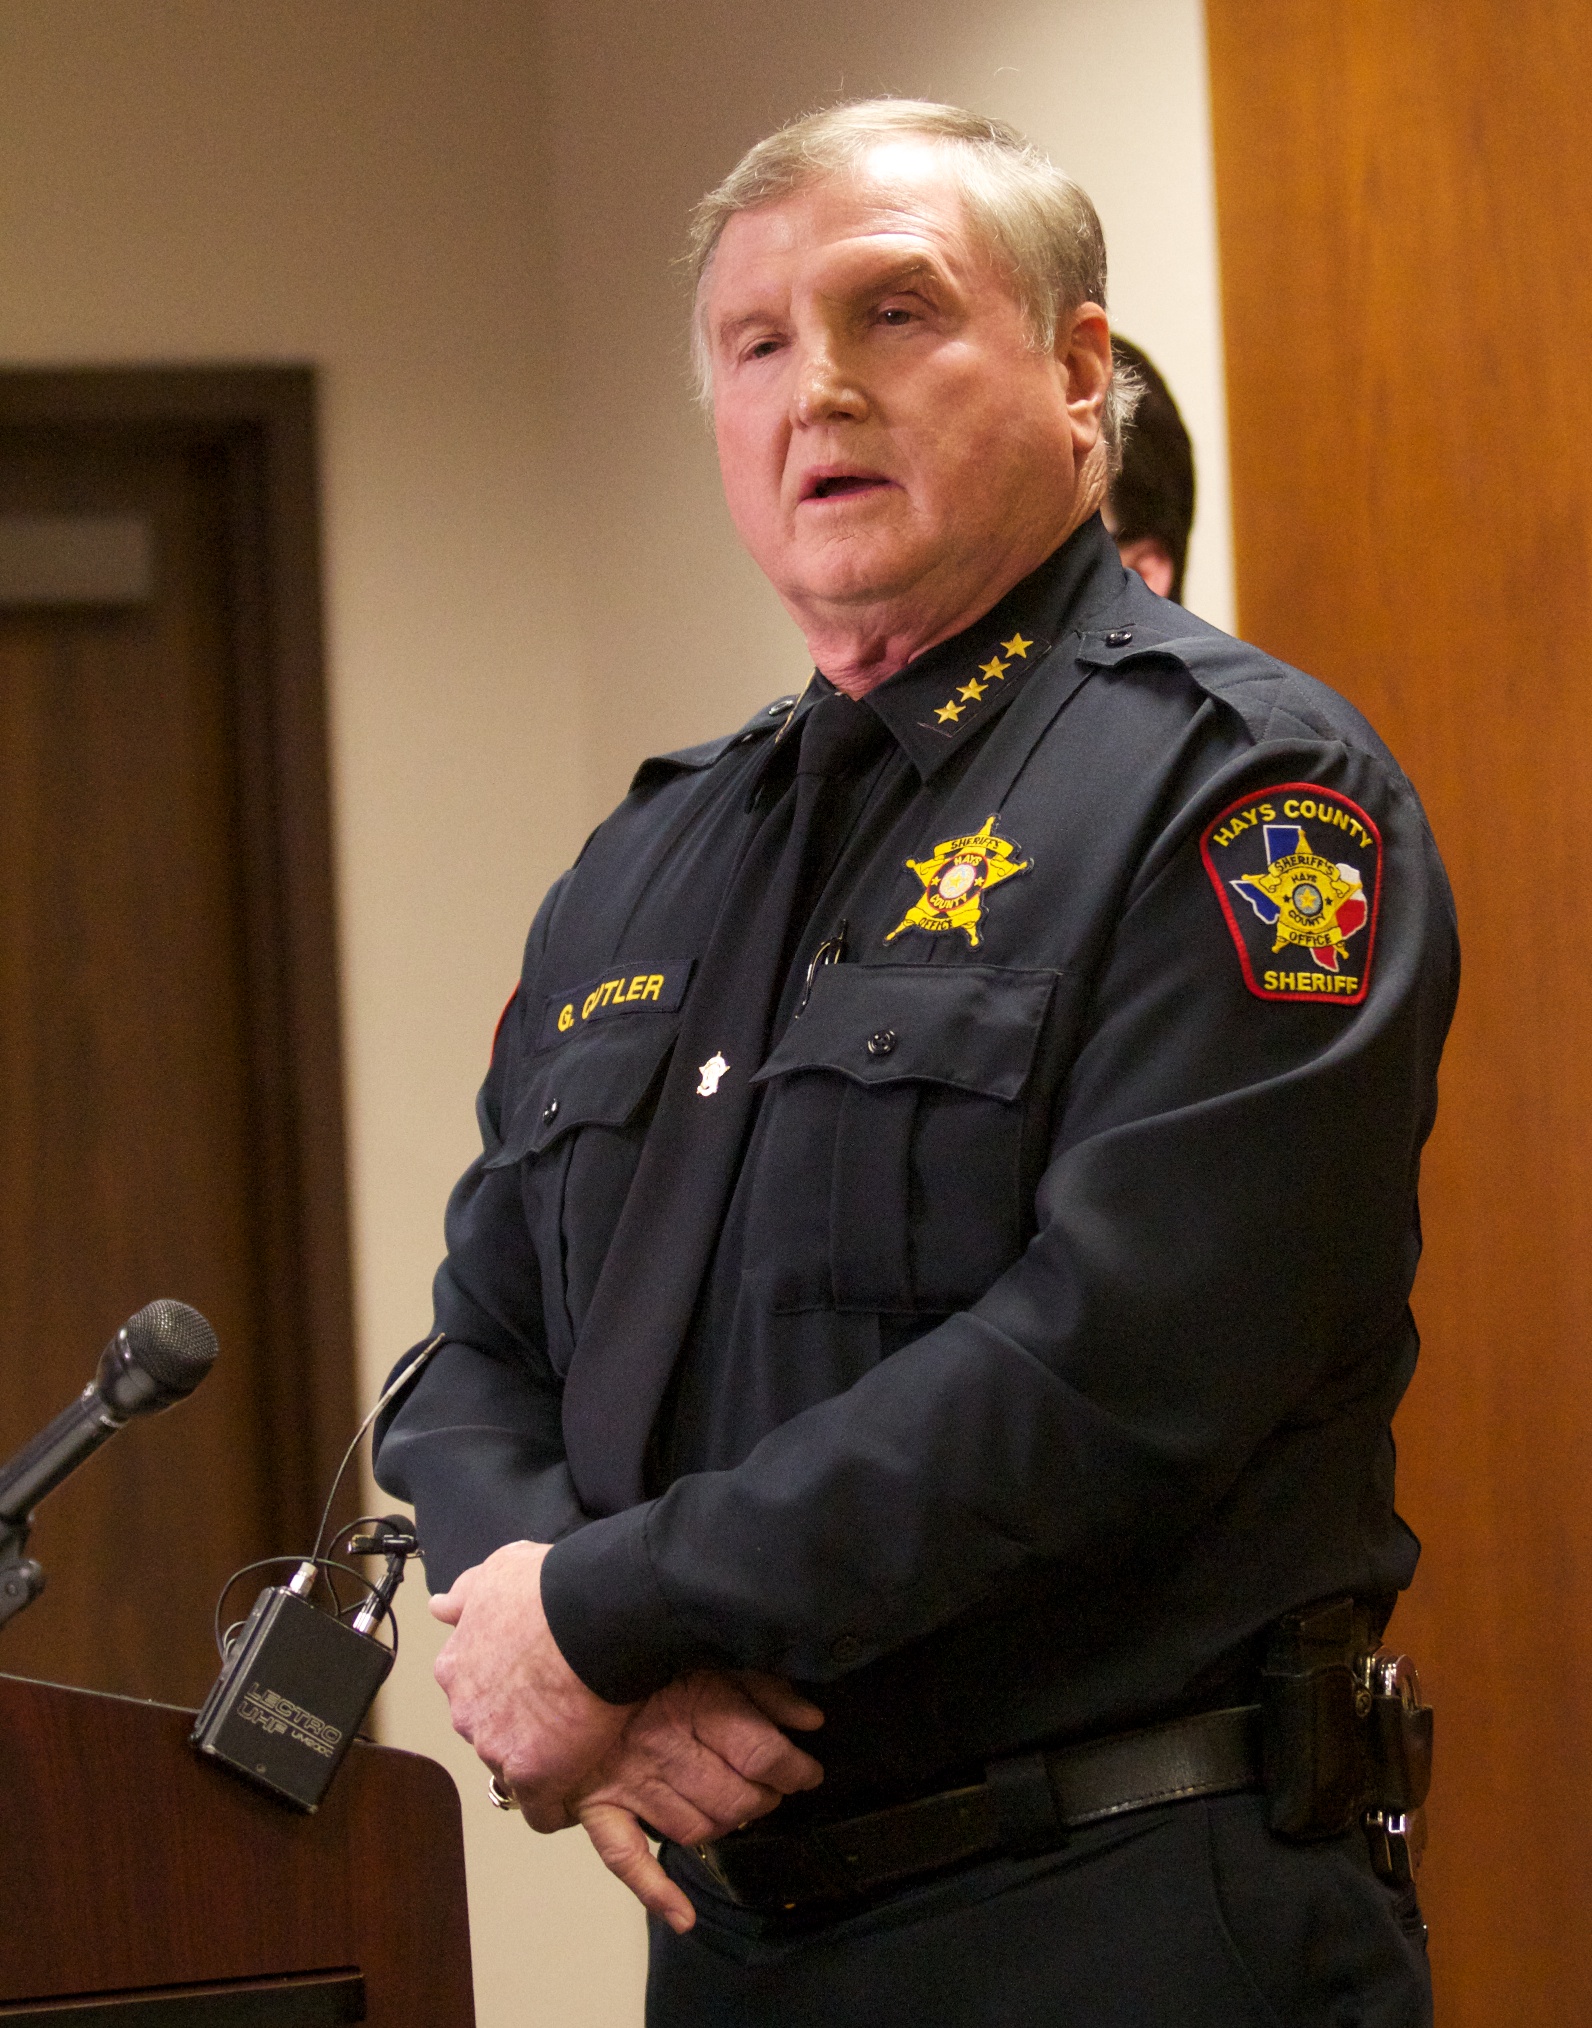 Hays County Sheriff Gary Cutler provides media members information on an investigation involving the death of a five-year-old girl at a press conference at the Hays County Sheriff's Office headquarters in San Marcos. Photo by Moses Leos III 